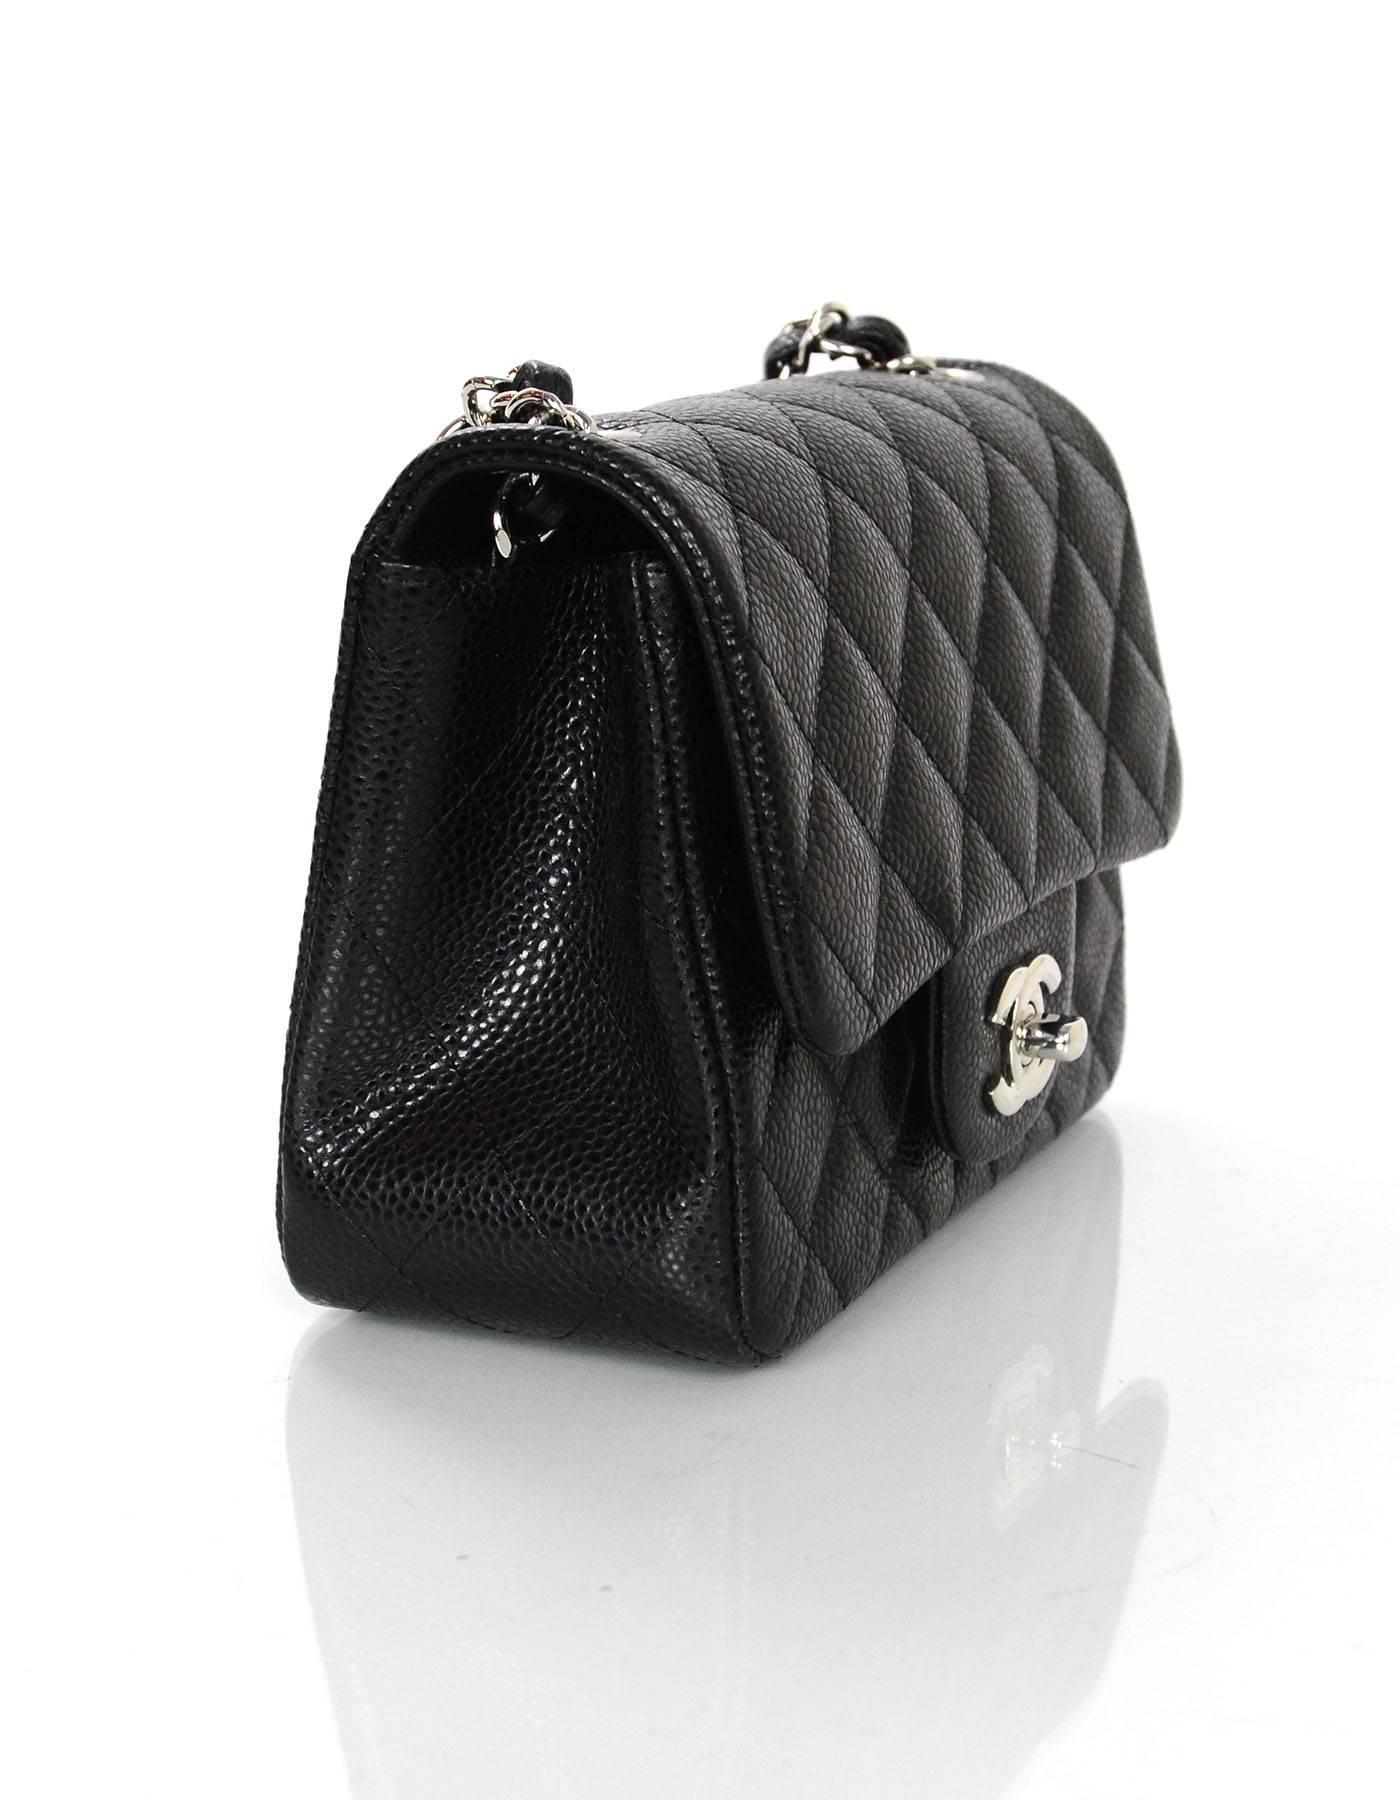 100% Authentic Chanel Black Caviar Mini Flap Bag.  Features classic quilting with CC tiwst-lock closure.

Made in: France
Year of Production: 2015
Color: Black
Hardware: Silvertone
Materials: Leather, metal
Lining: Black